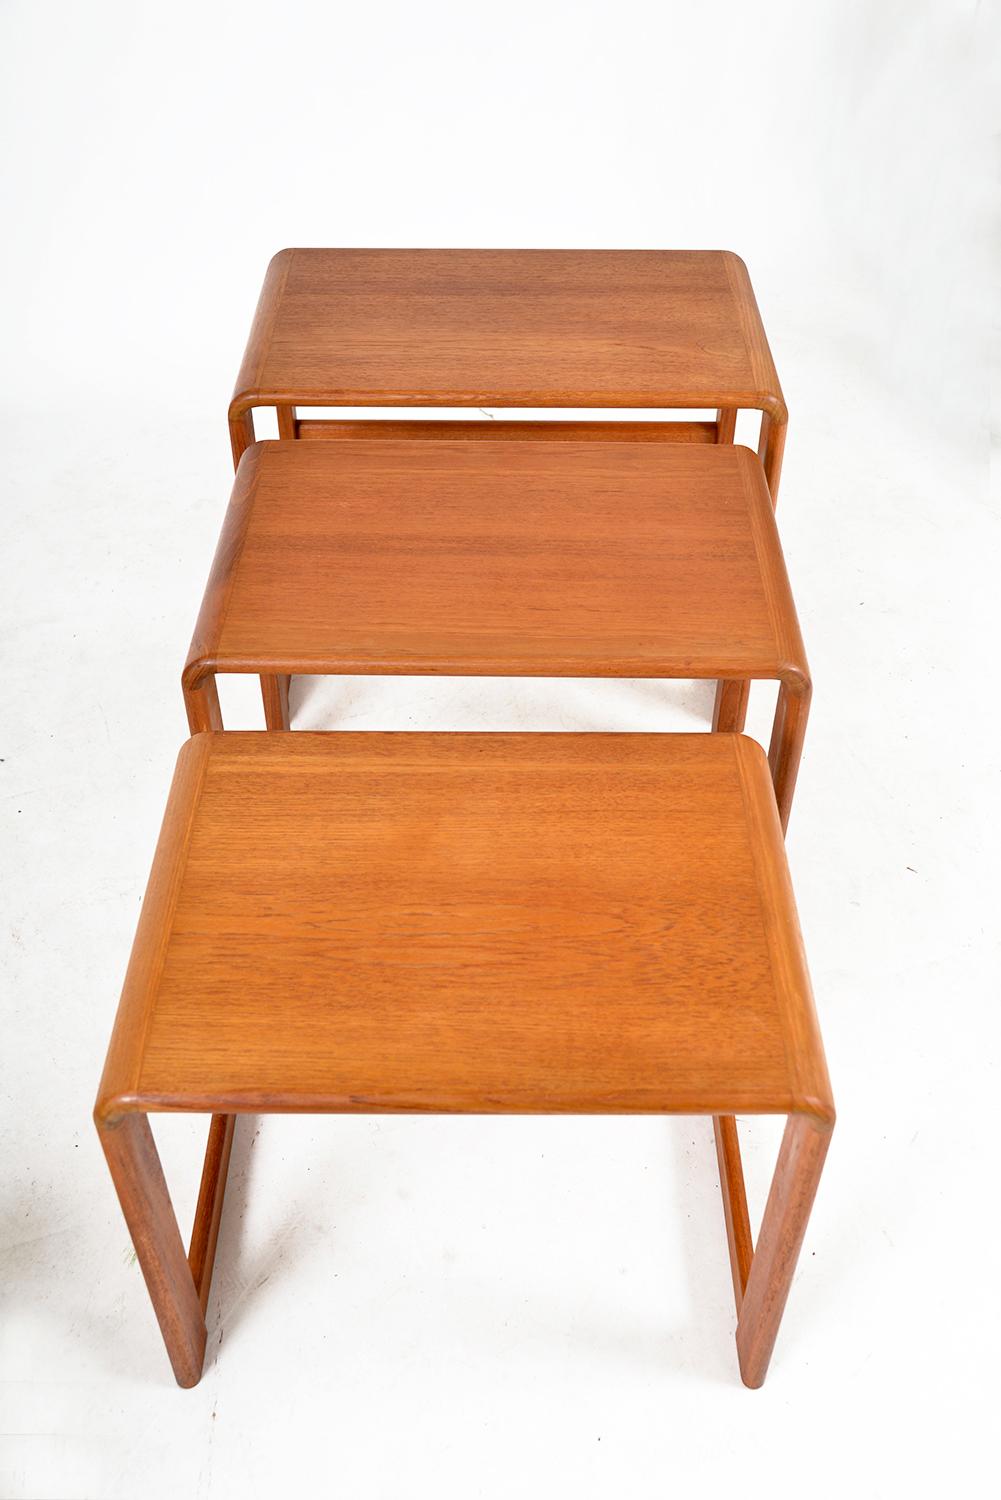 Midcentury Teak Nesting Occasional Tables by O'Donnell Design Irish 1970s Danish For Sale 7